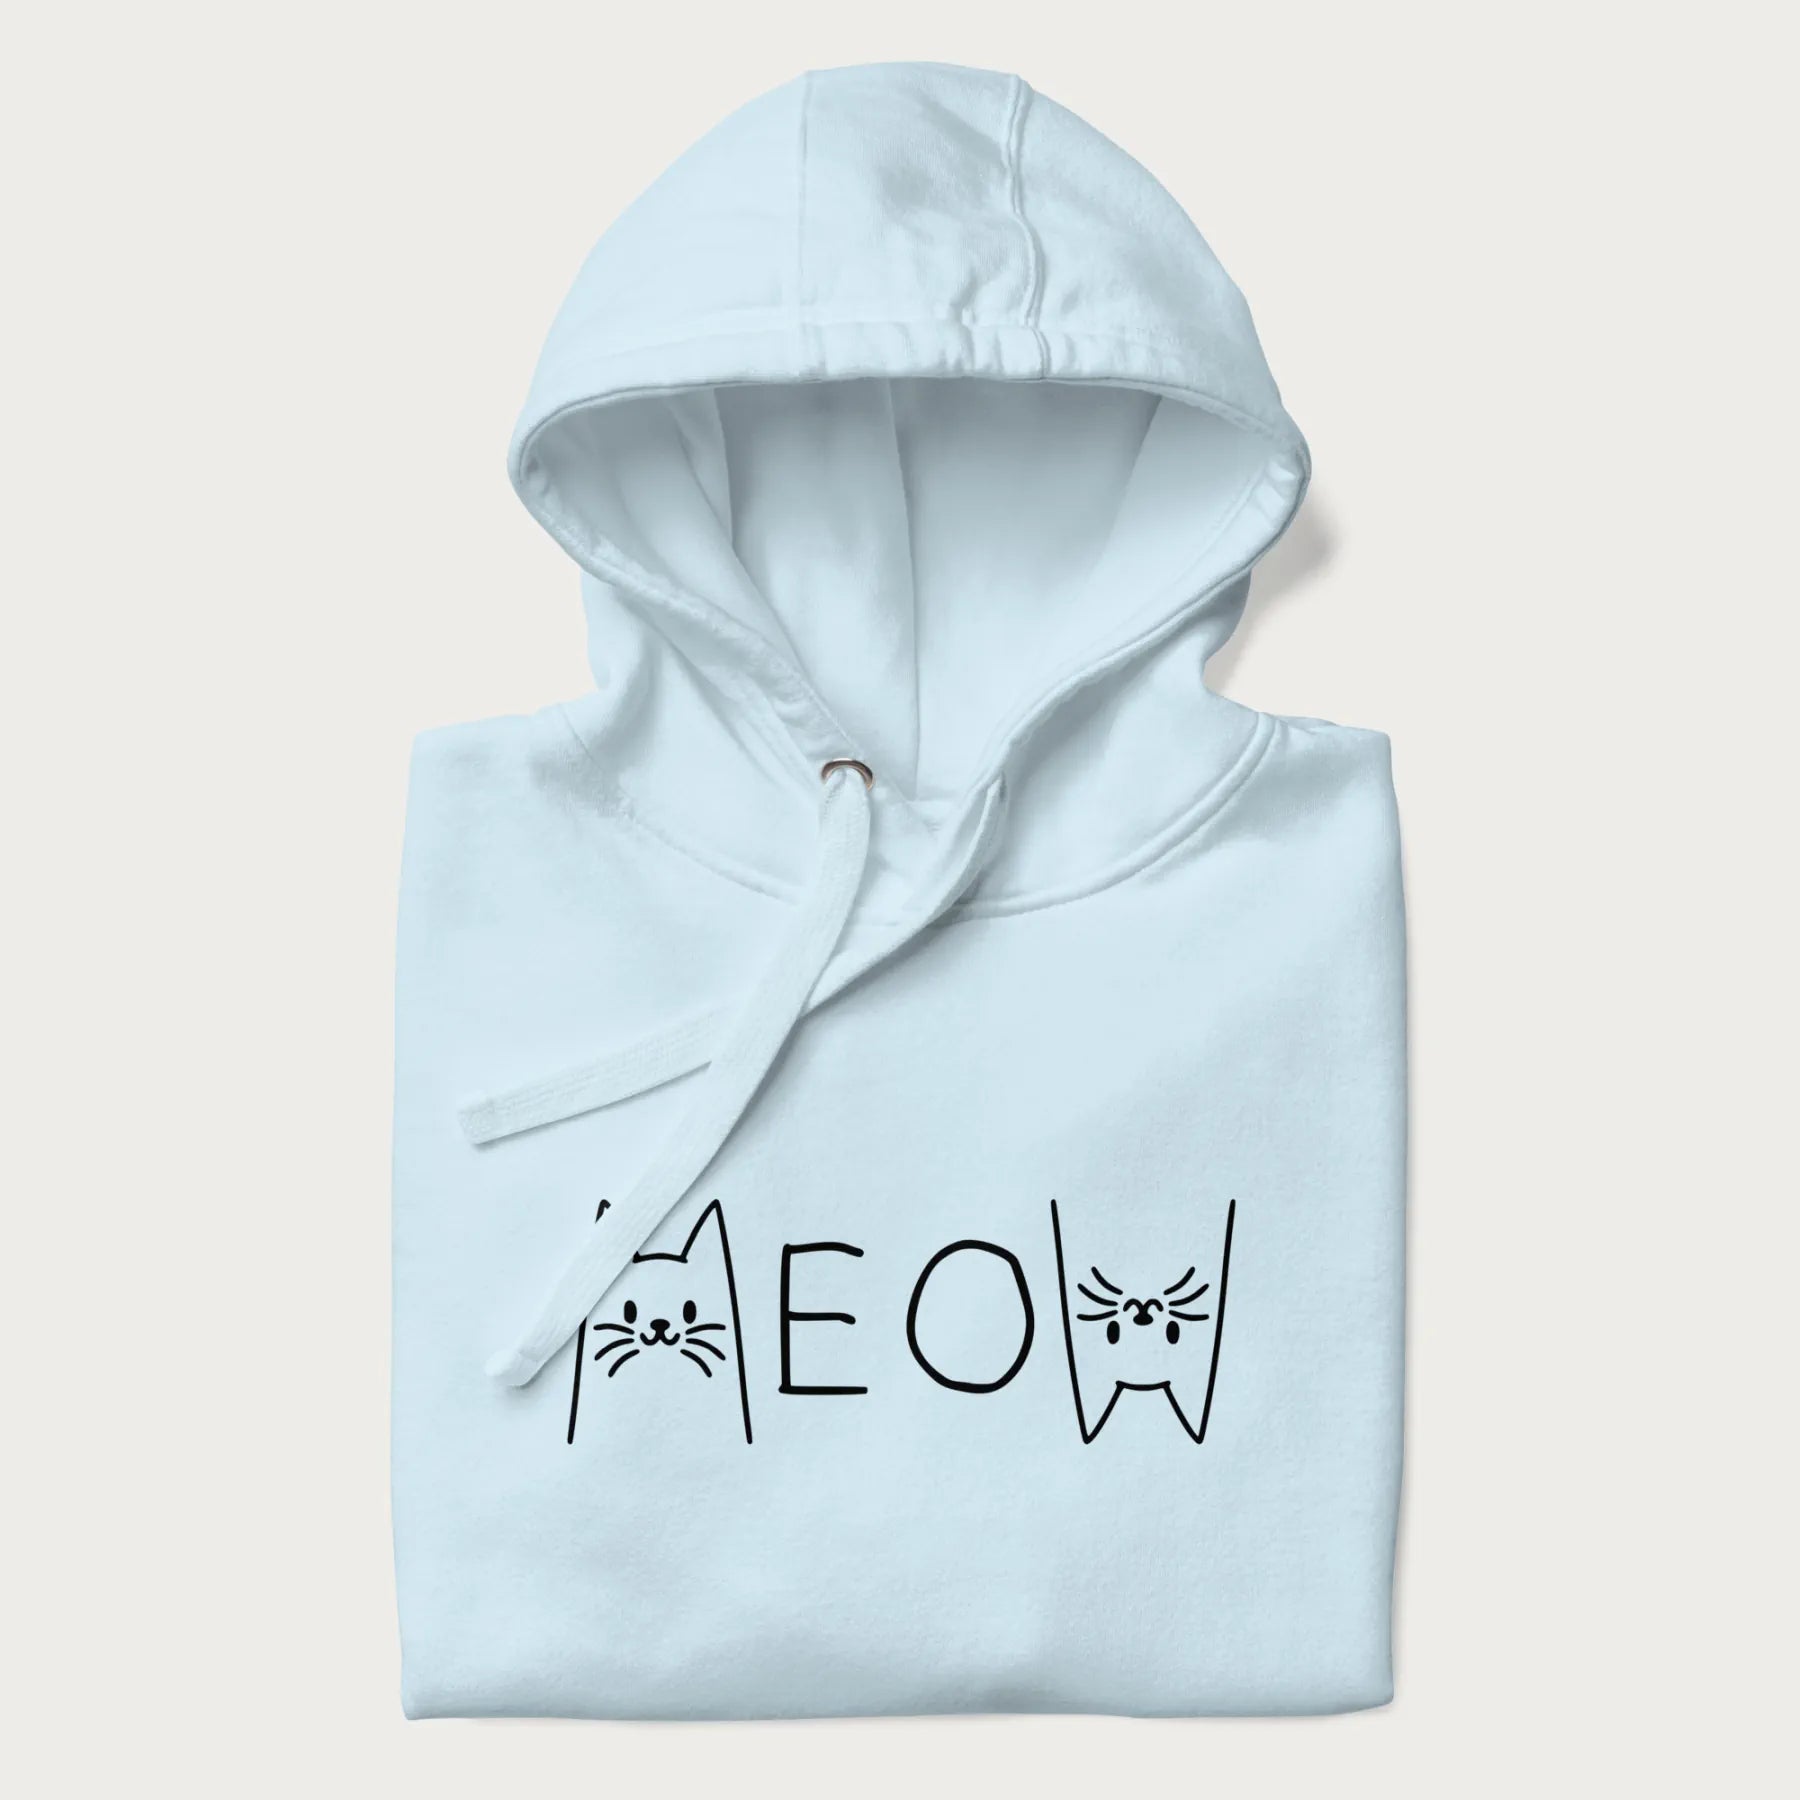 Folded light blue meow hoodie with a simple 'MEOW' text and cute cat face graphics on the front.